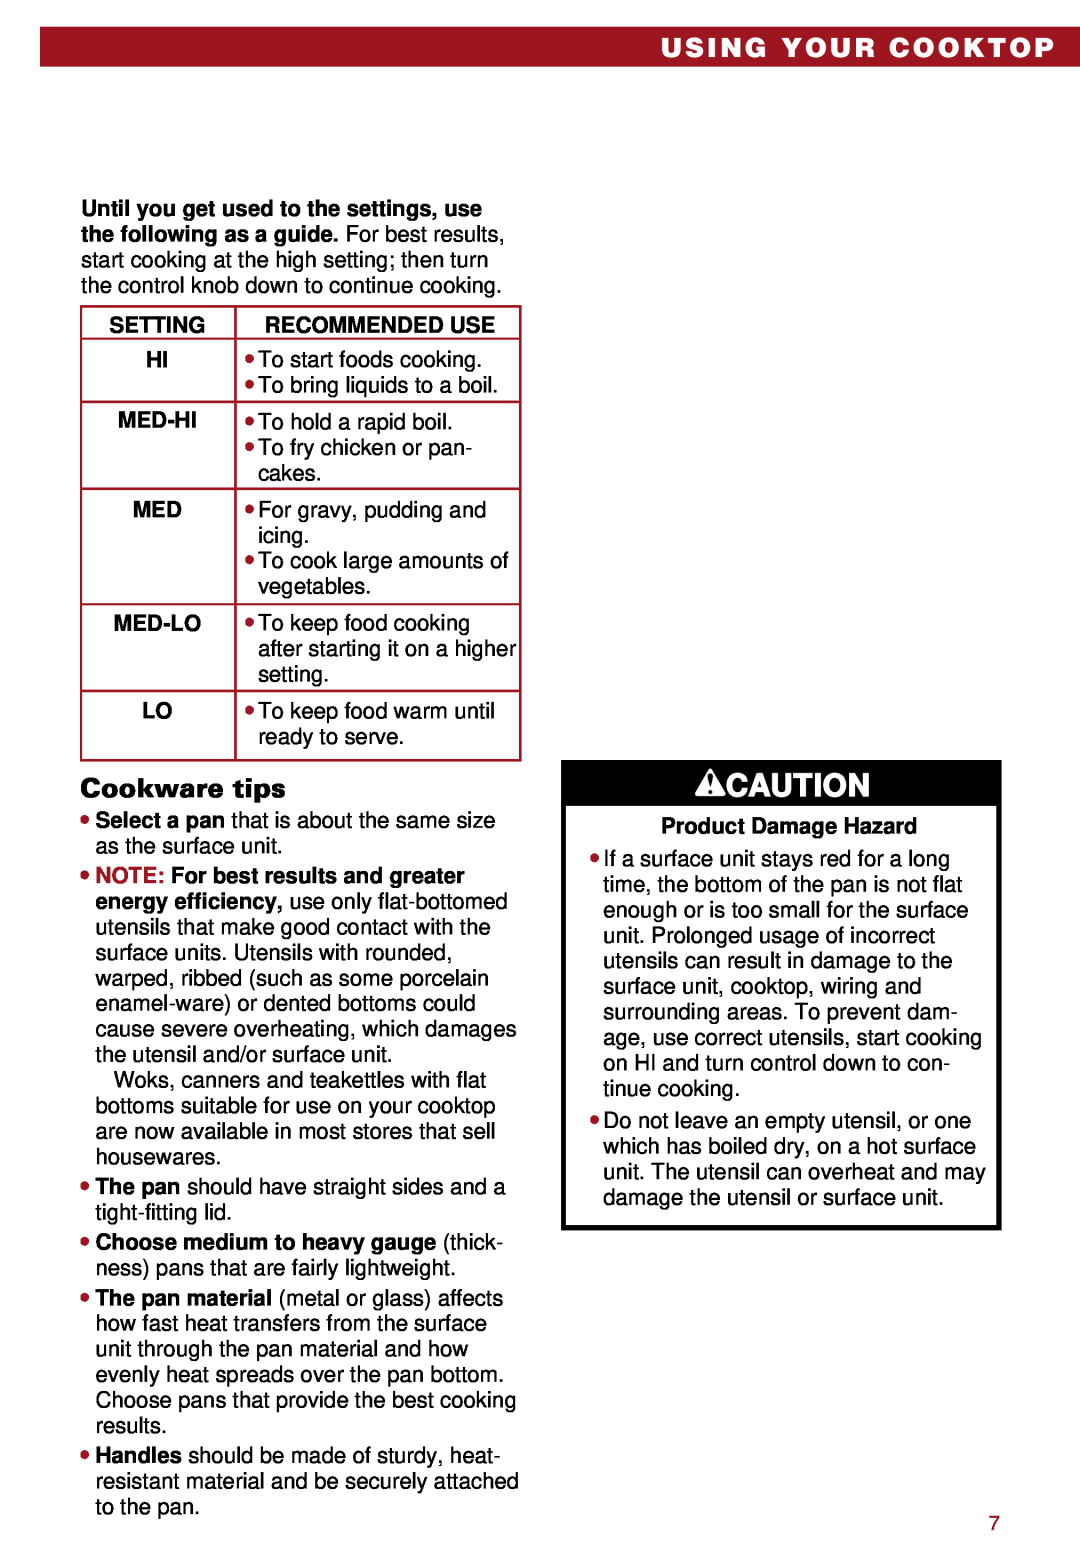 Whirlpool RC8100XA, RC8110XA important safety instructions Using Your Cooktop, Cookware tips 